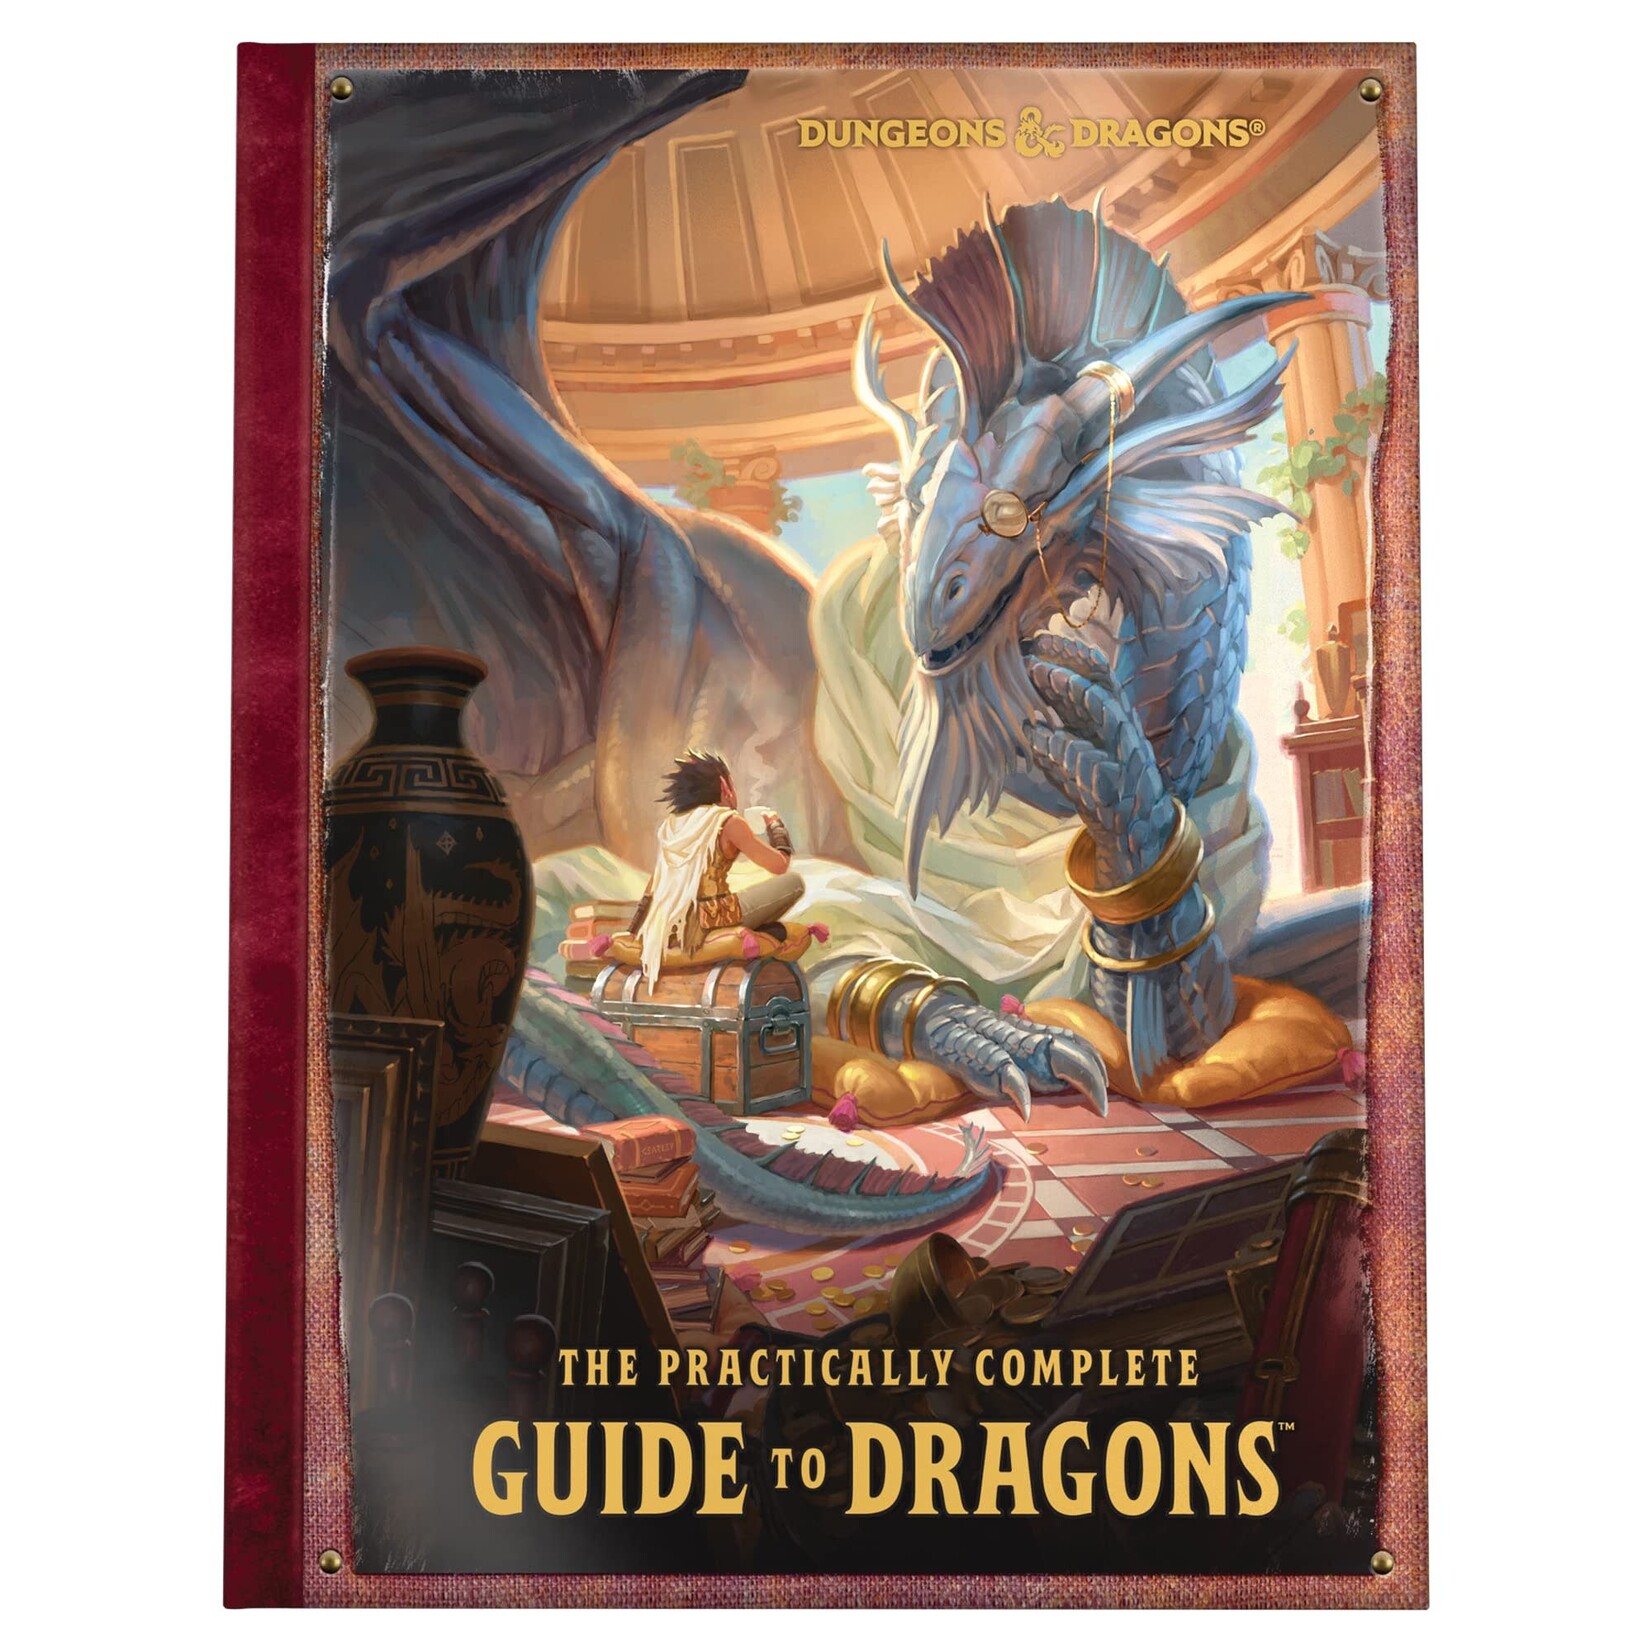 Dungeons & Dragons Dungeons & Dragons – The Practically Complete Guide to Dragons (5th Edition)